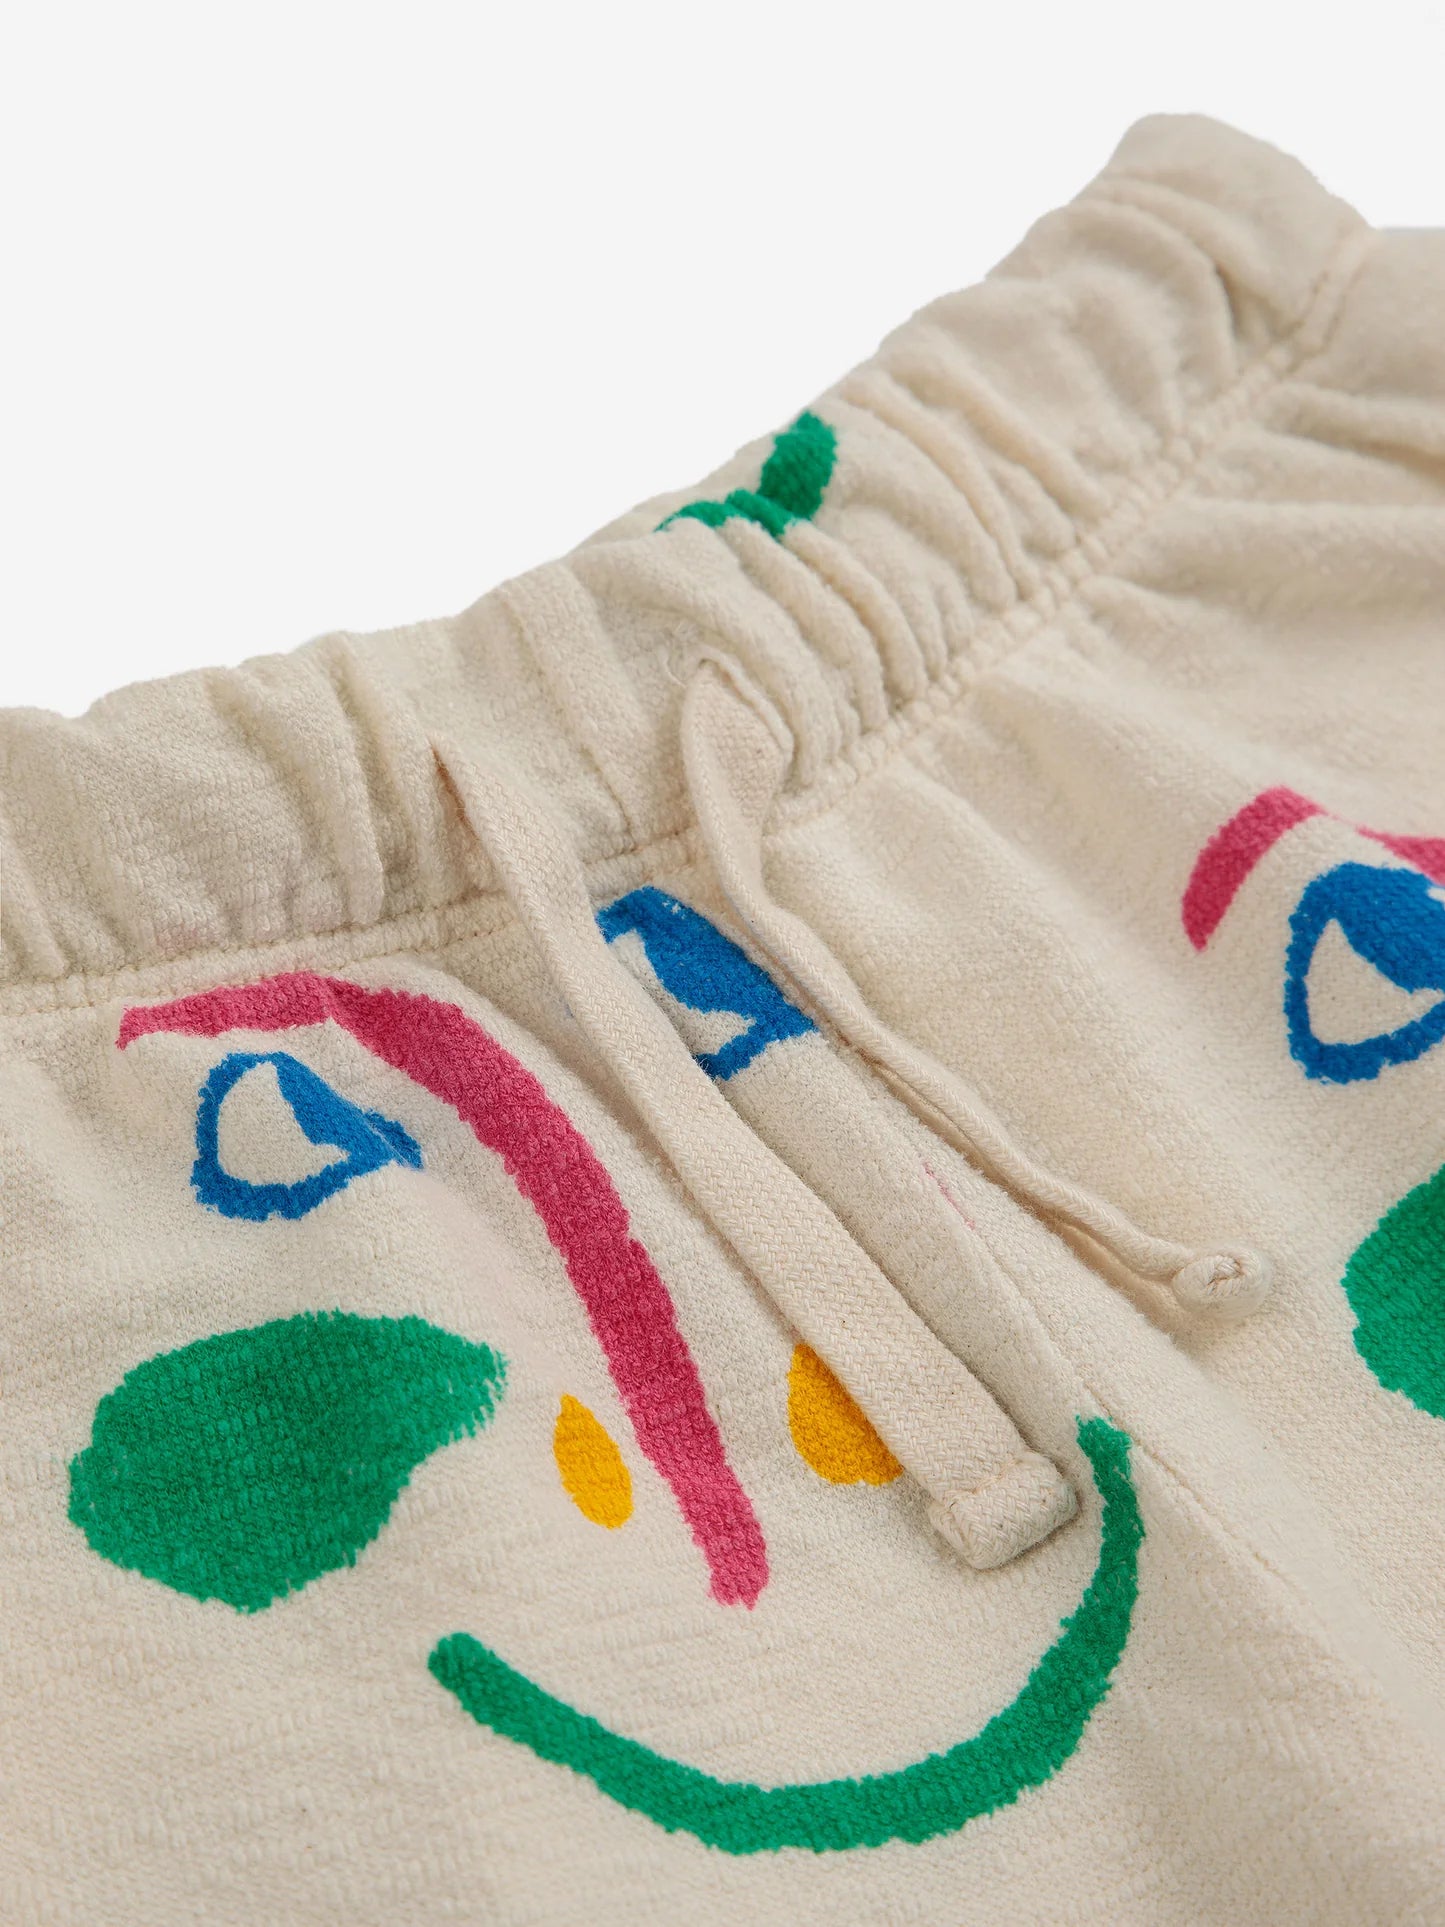 Smiling Mask All Over Jogging Pants by Bobo Choses.